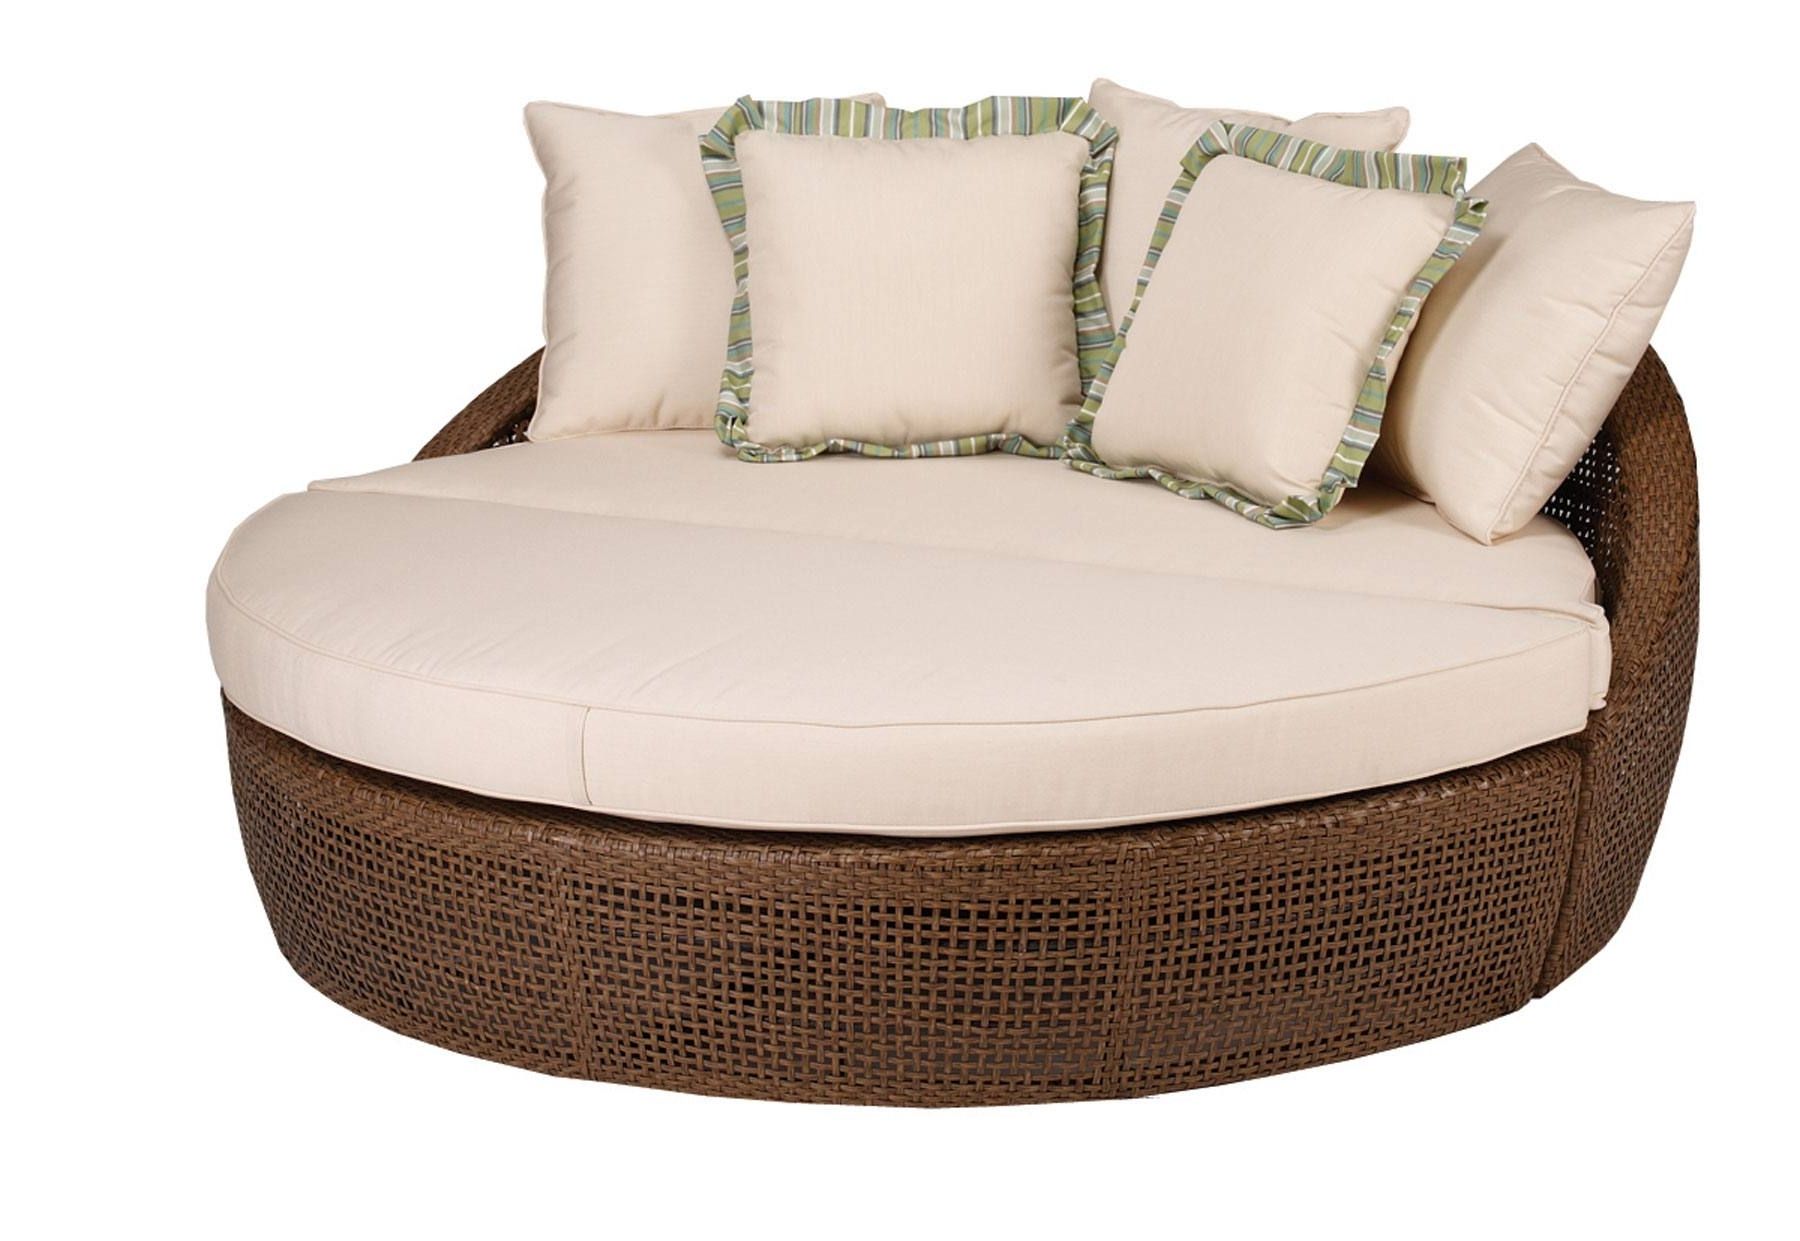 Most Recent Cheap Indoor Chaise Lounges Pertaining To Outdoor : Outdoor Chaise Lounge Cheap Chaise Lounge Double Chaise (Photo 11 of 15)